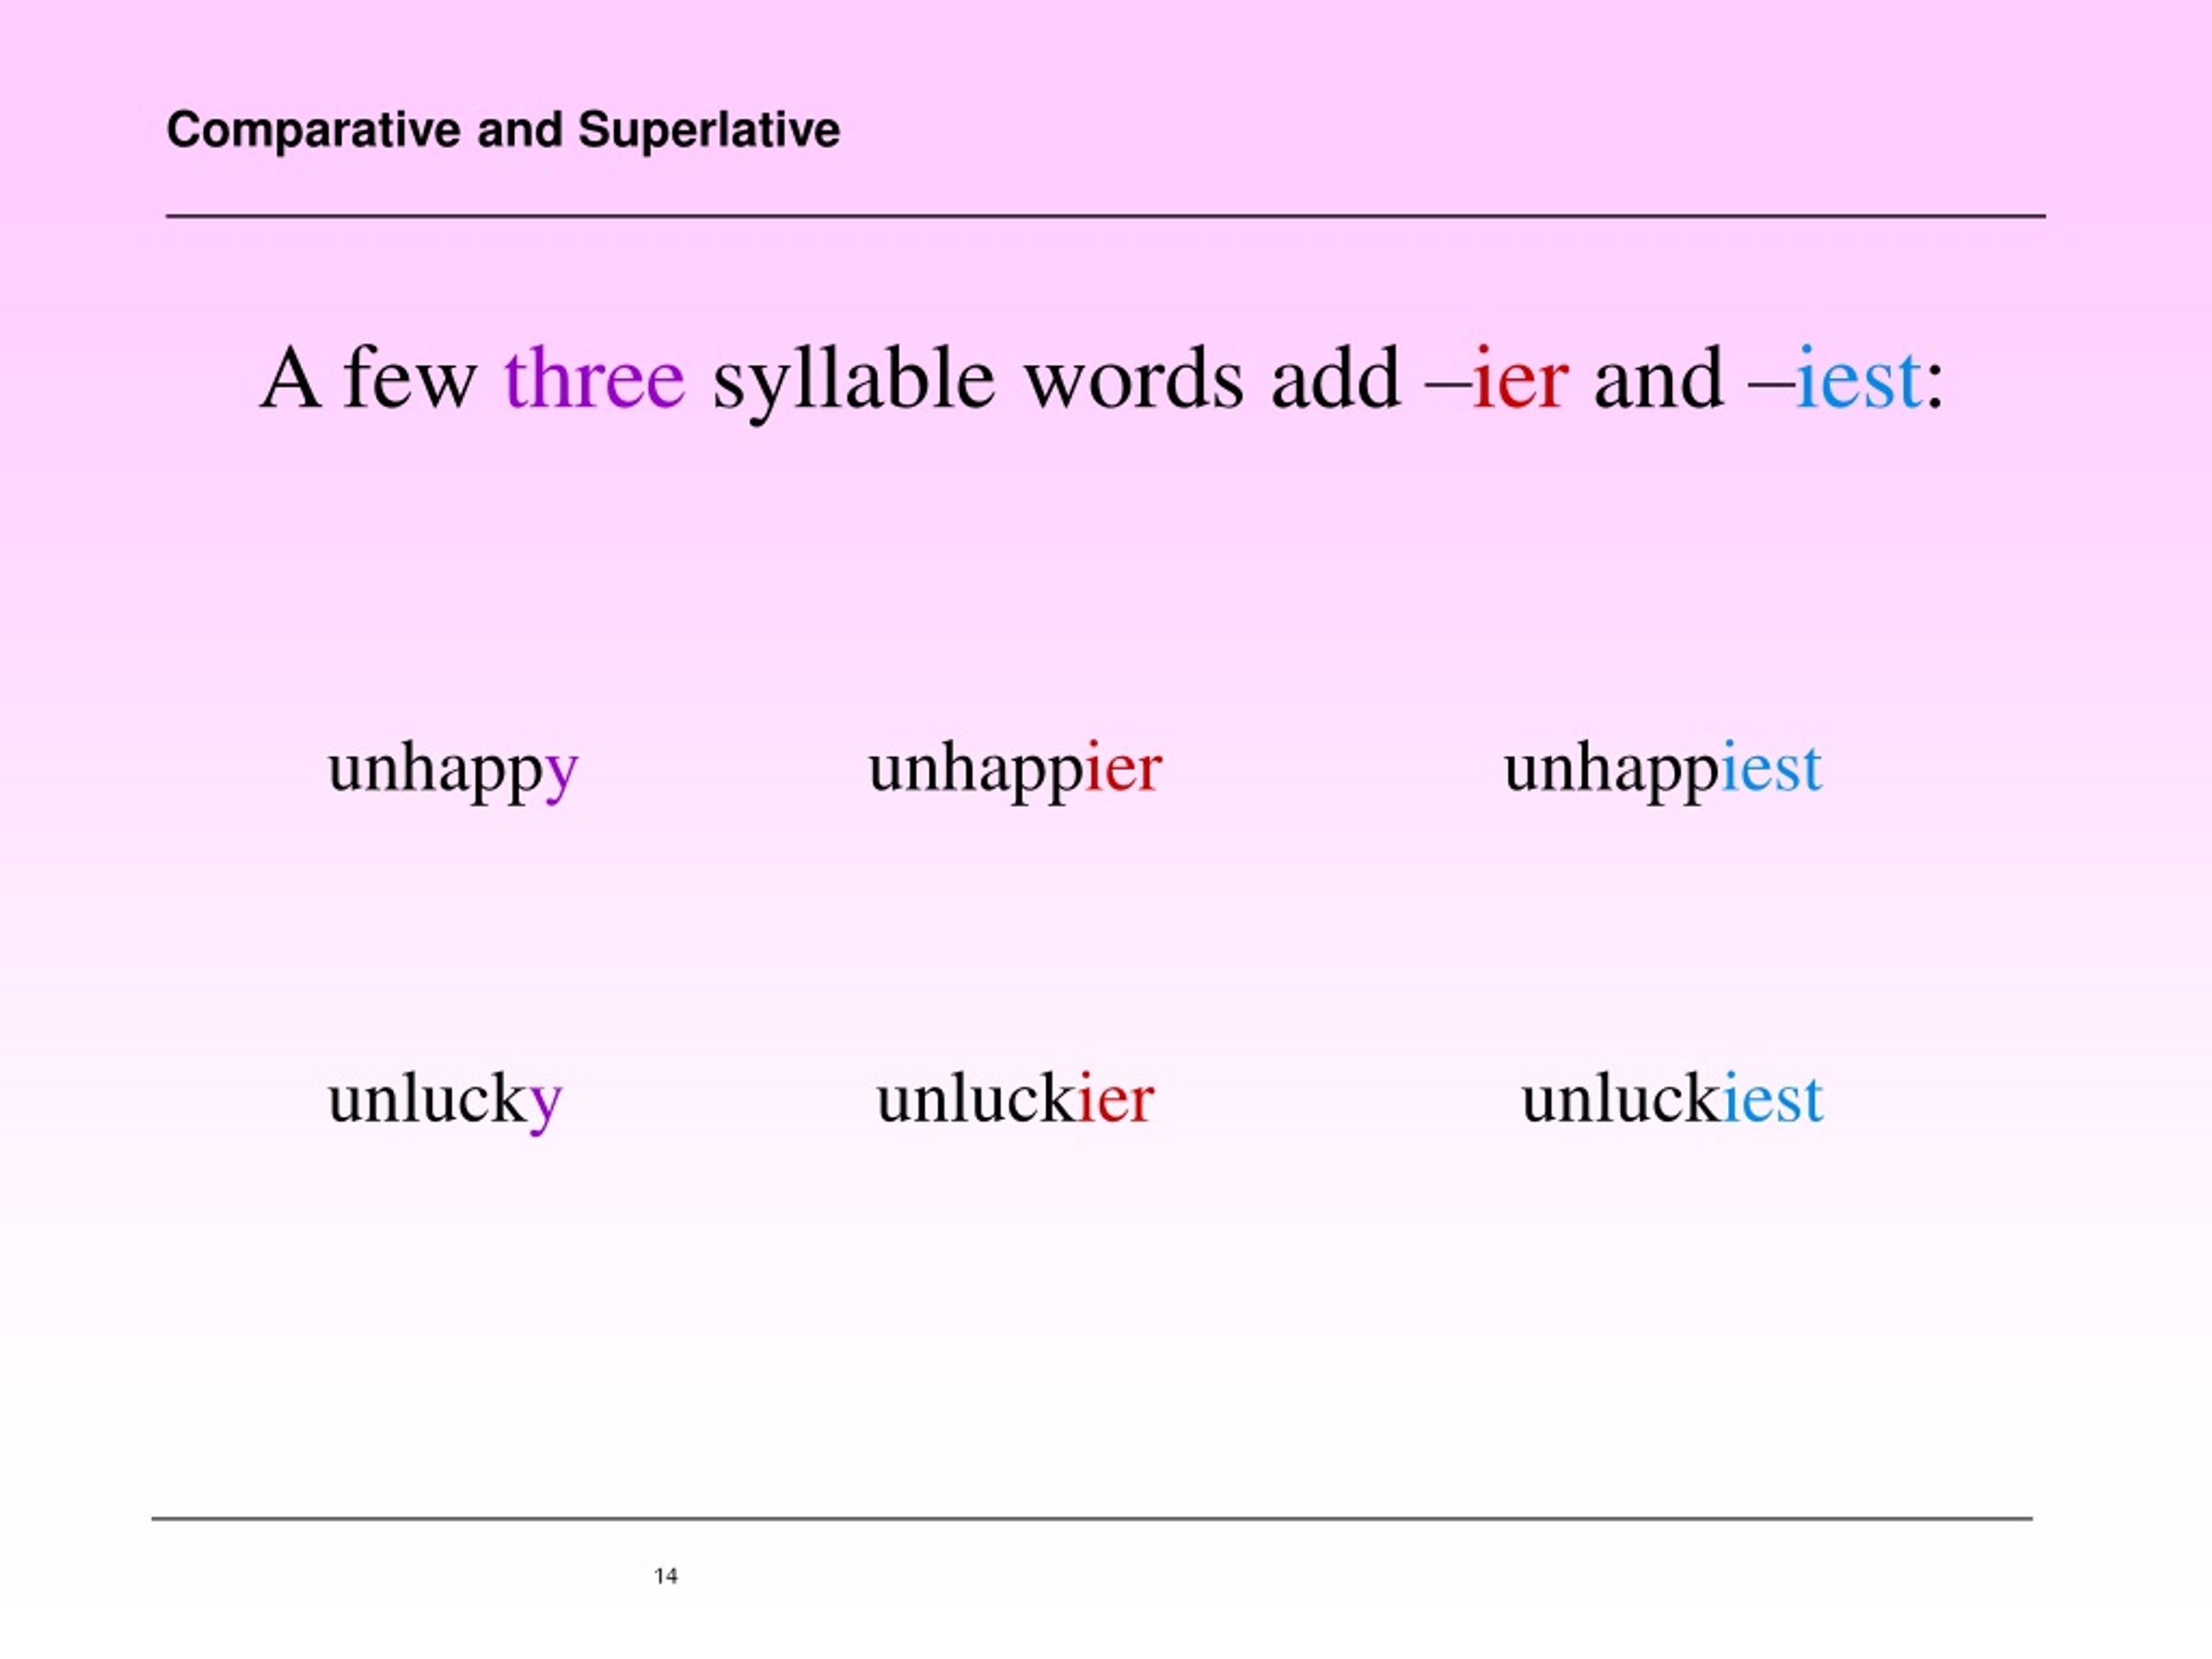 Clever comparative and superlative. Comparatives and Superlatives. Предложения Comparative and Superlative. Few Comparative and Superlative. Comparative and Superlatives упражнения 3 syllables.